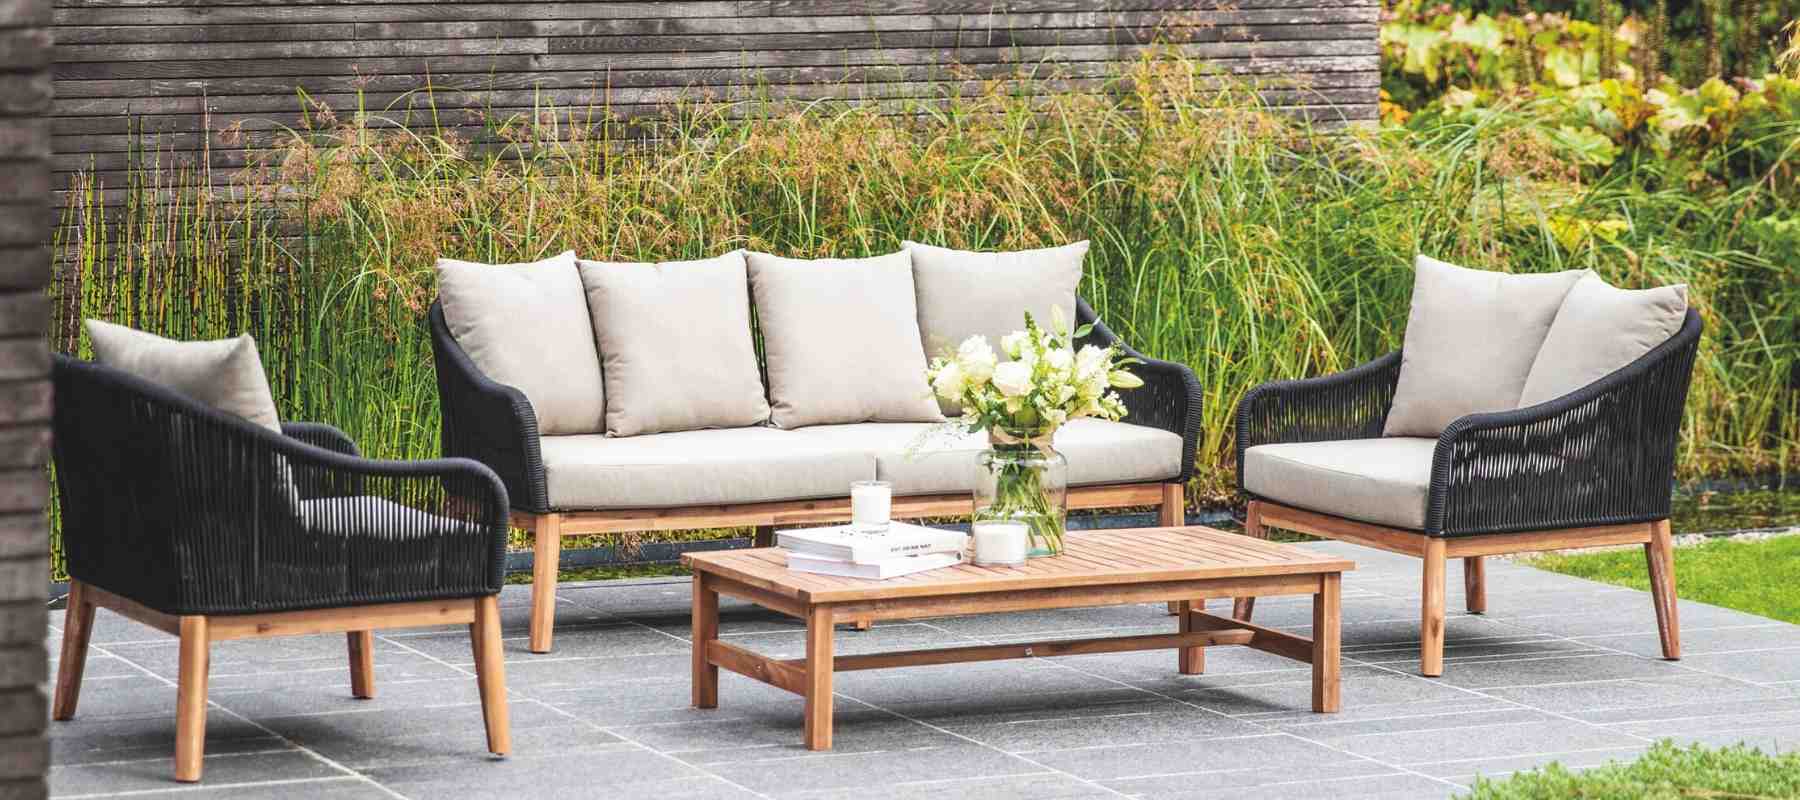 Wood framed garden sofa set with white cushions and coffee table